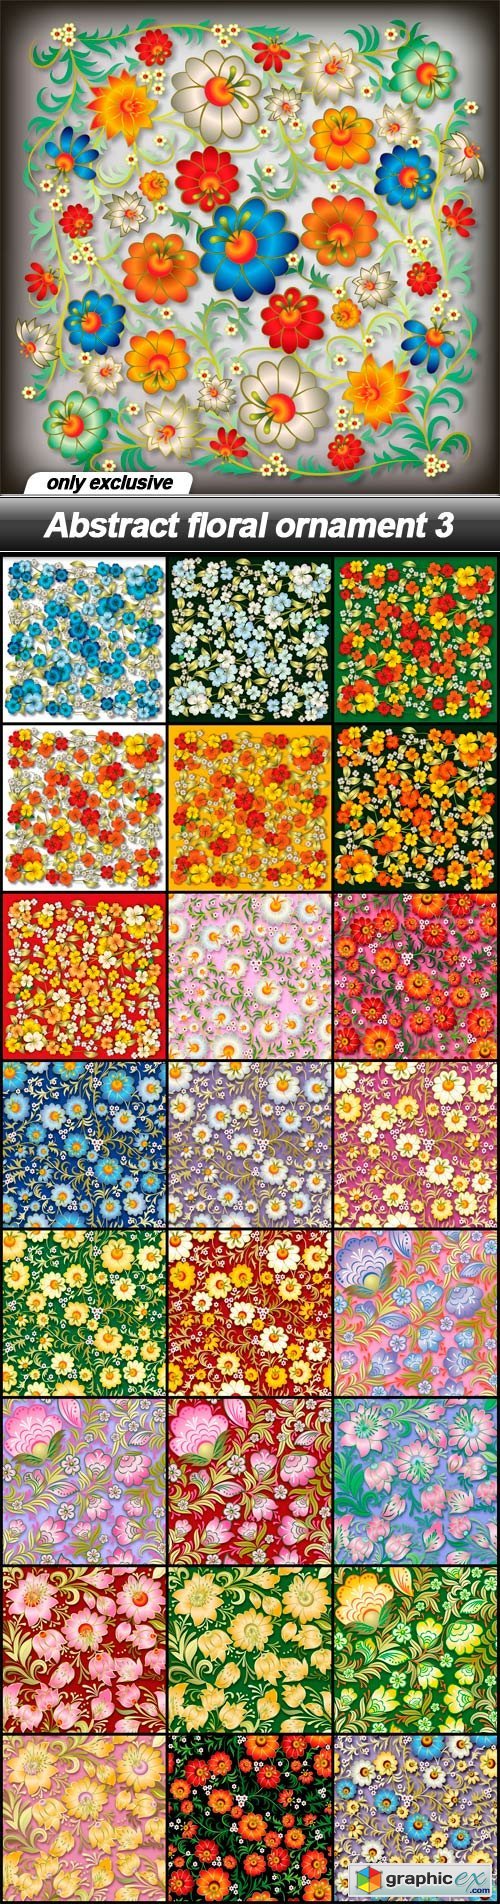 Abstract floral ornament 3 - 25 EPS